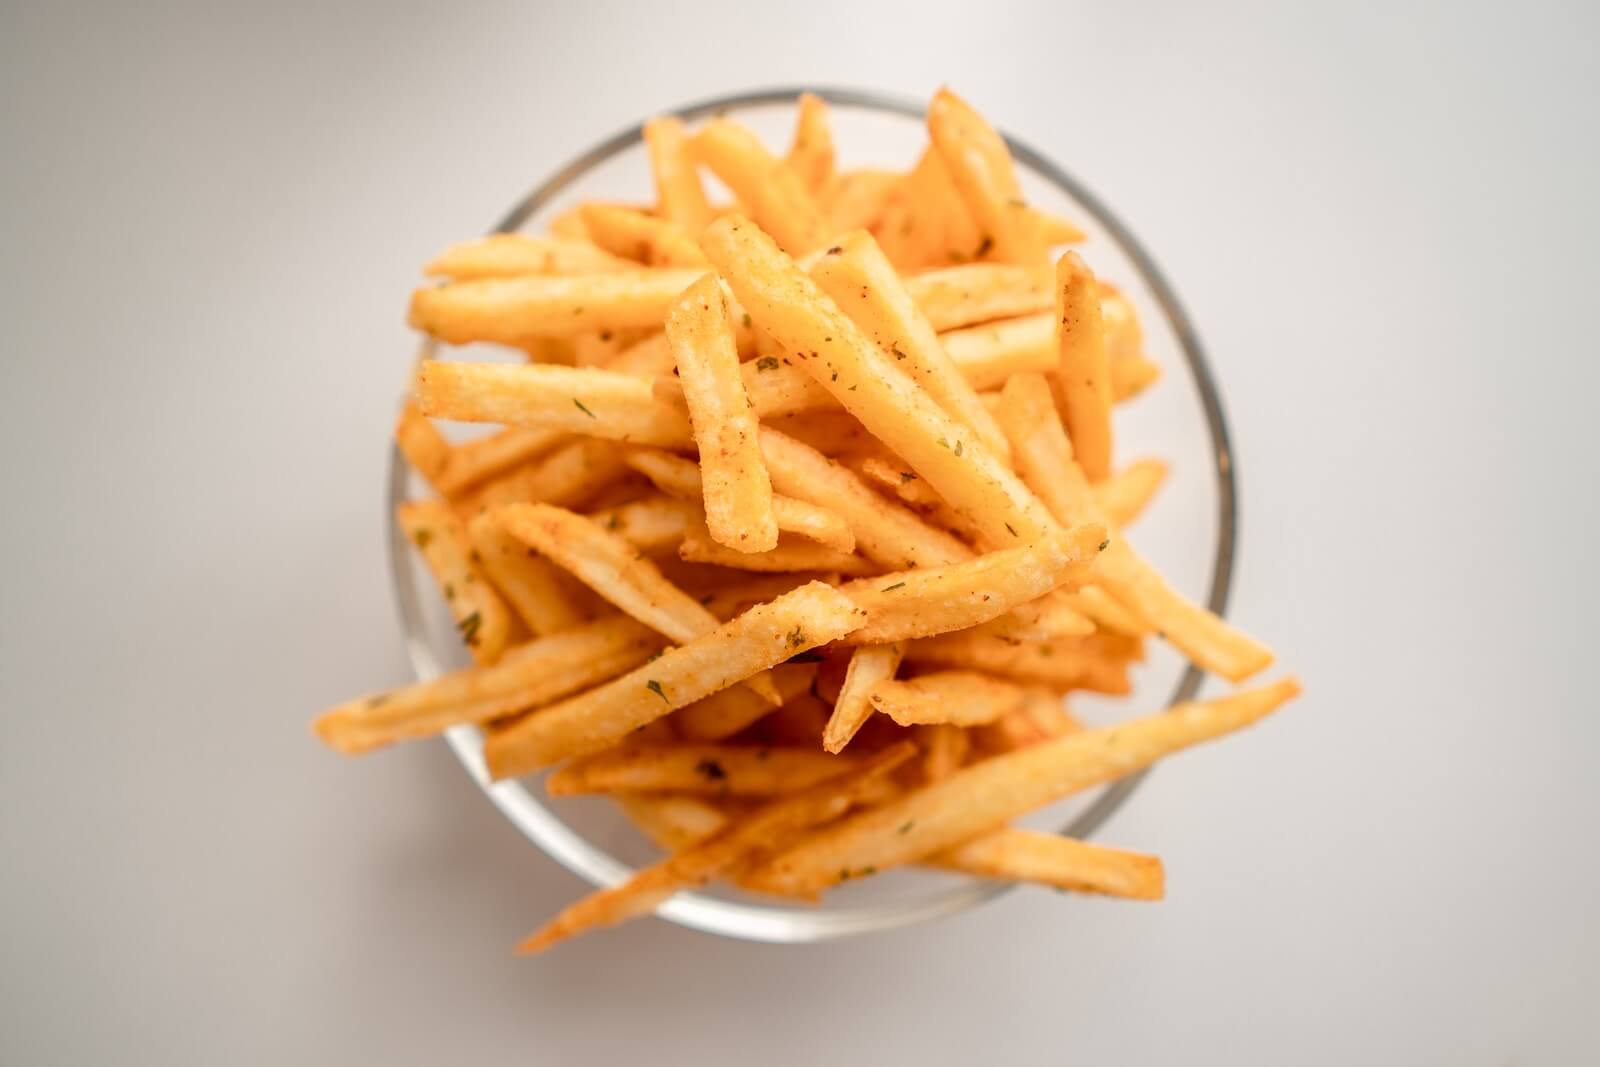 A Ranking Of The Best Frozen French Fries